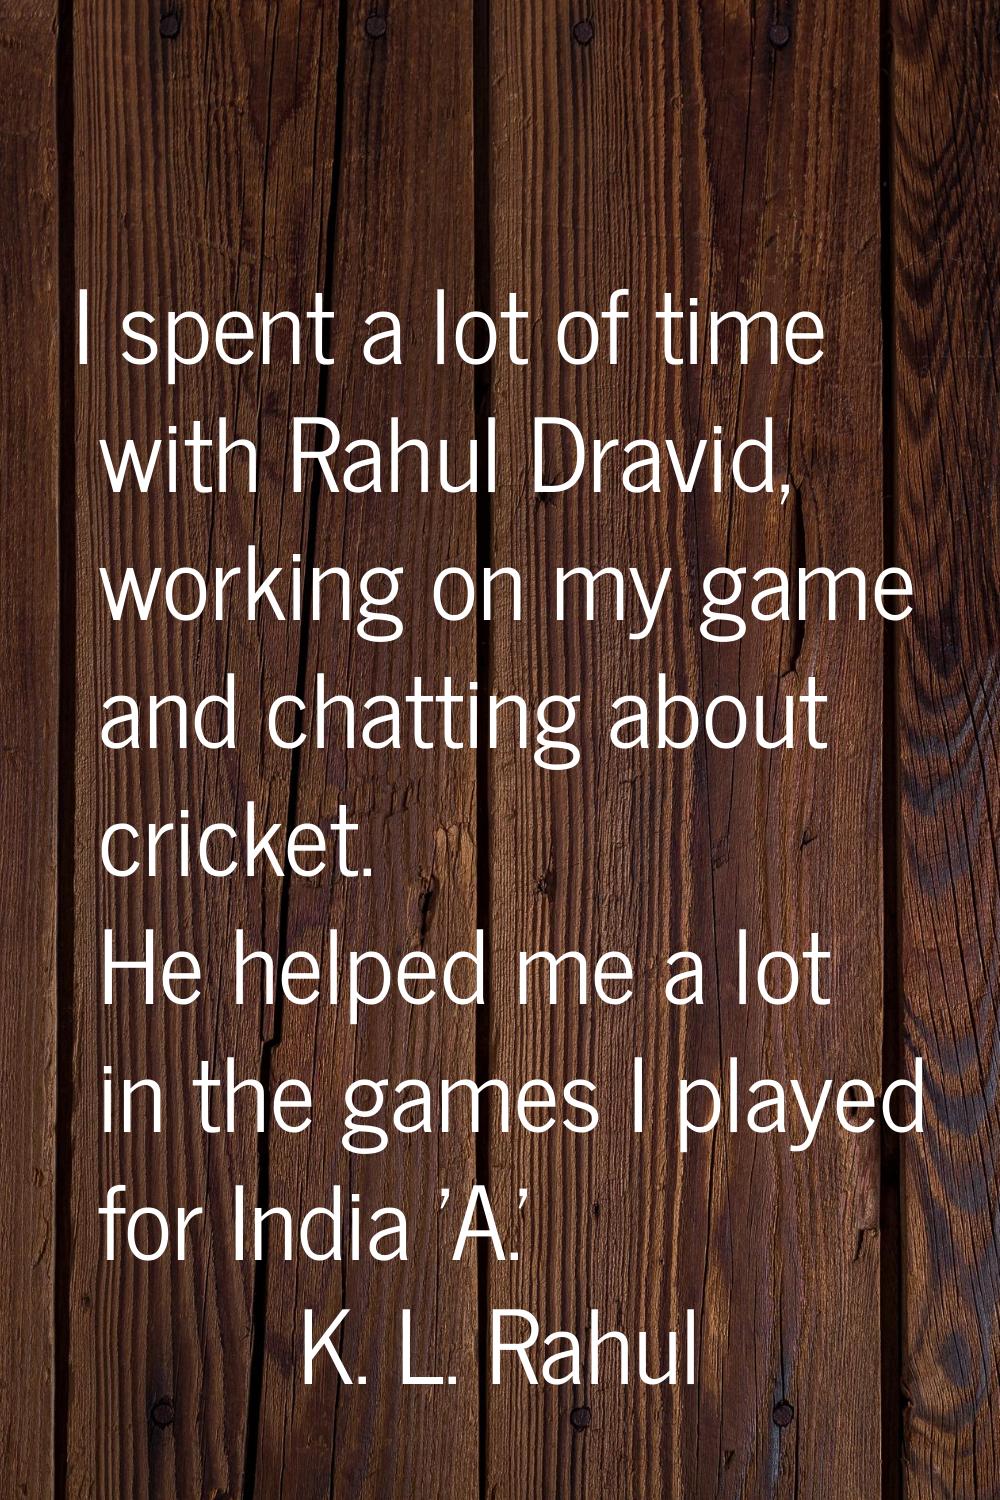 I spent a lot of time with Rahul Dravid, working on my game and chatting about cricket. He helped m